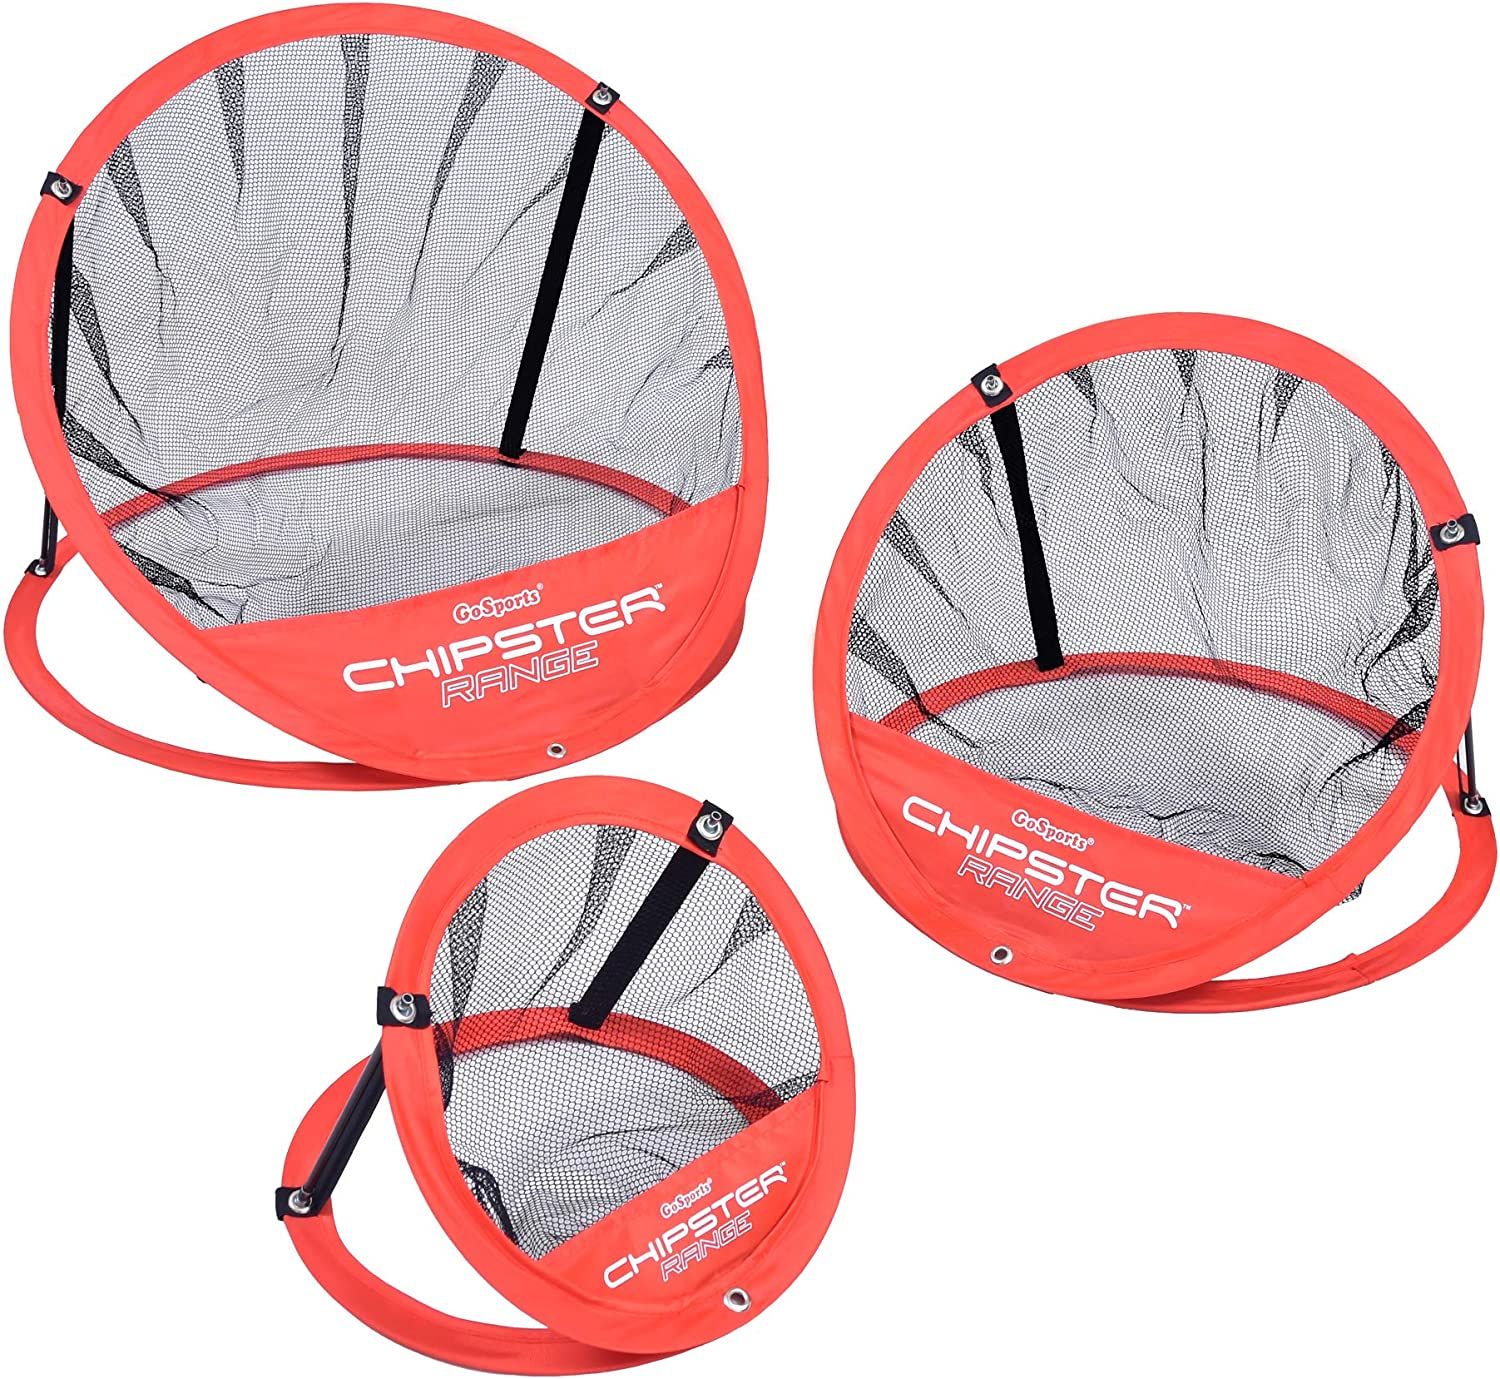 GoSports Chipster Golf Chipping Pop Up Practice Net, Practice & Improve Your Short Game | Amazon (US)